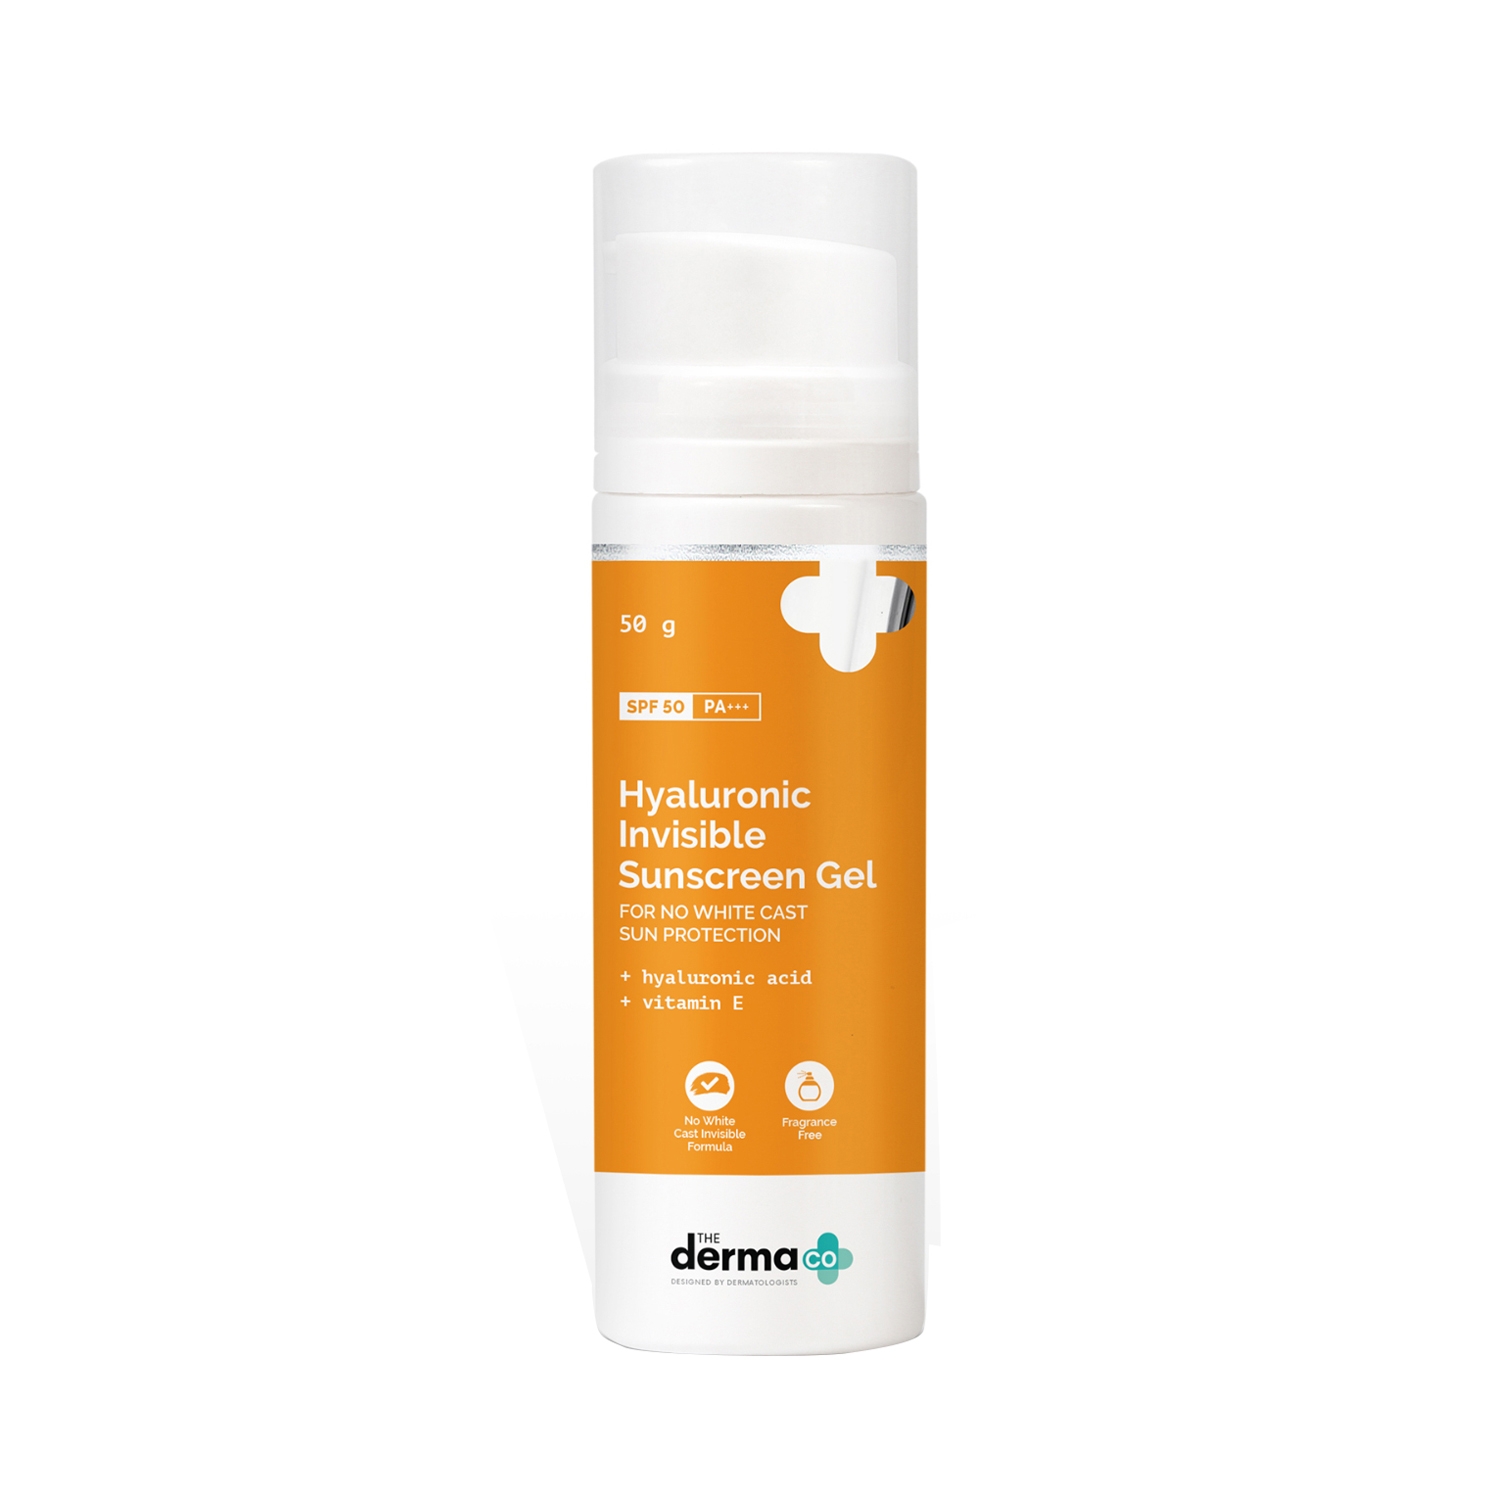 The Derma Co | The Derma Co Hyaluronic Invisible Sunscreen Gel With SPF 50 PA++ (50g)